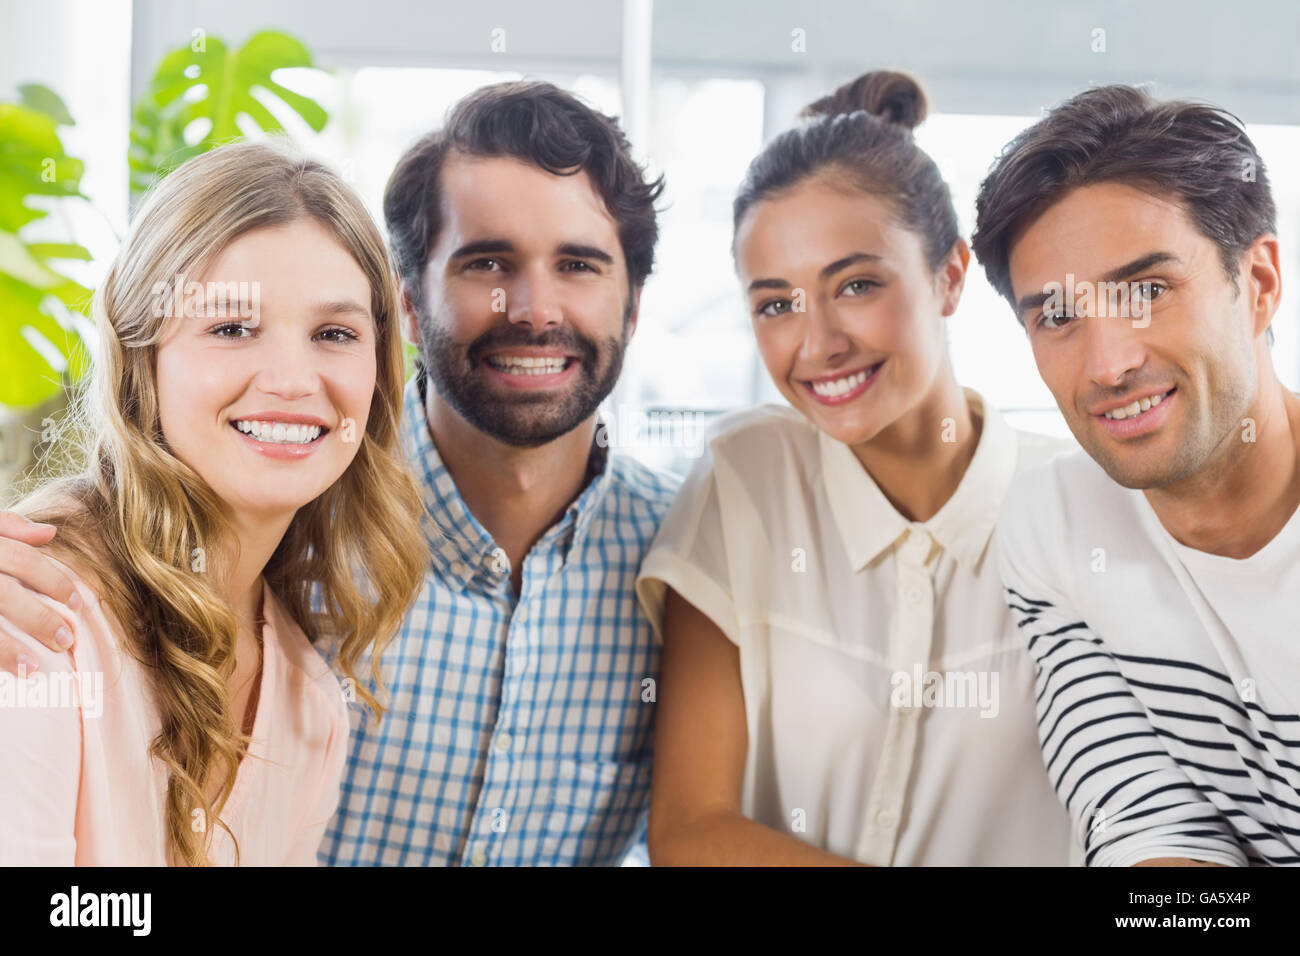 Portrait of smiling friends sitting together Stock Photo